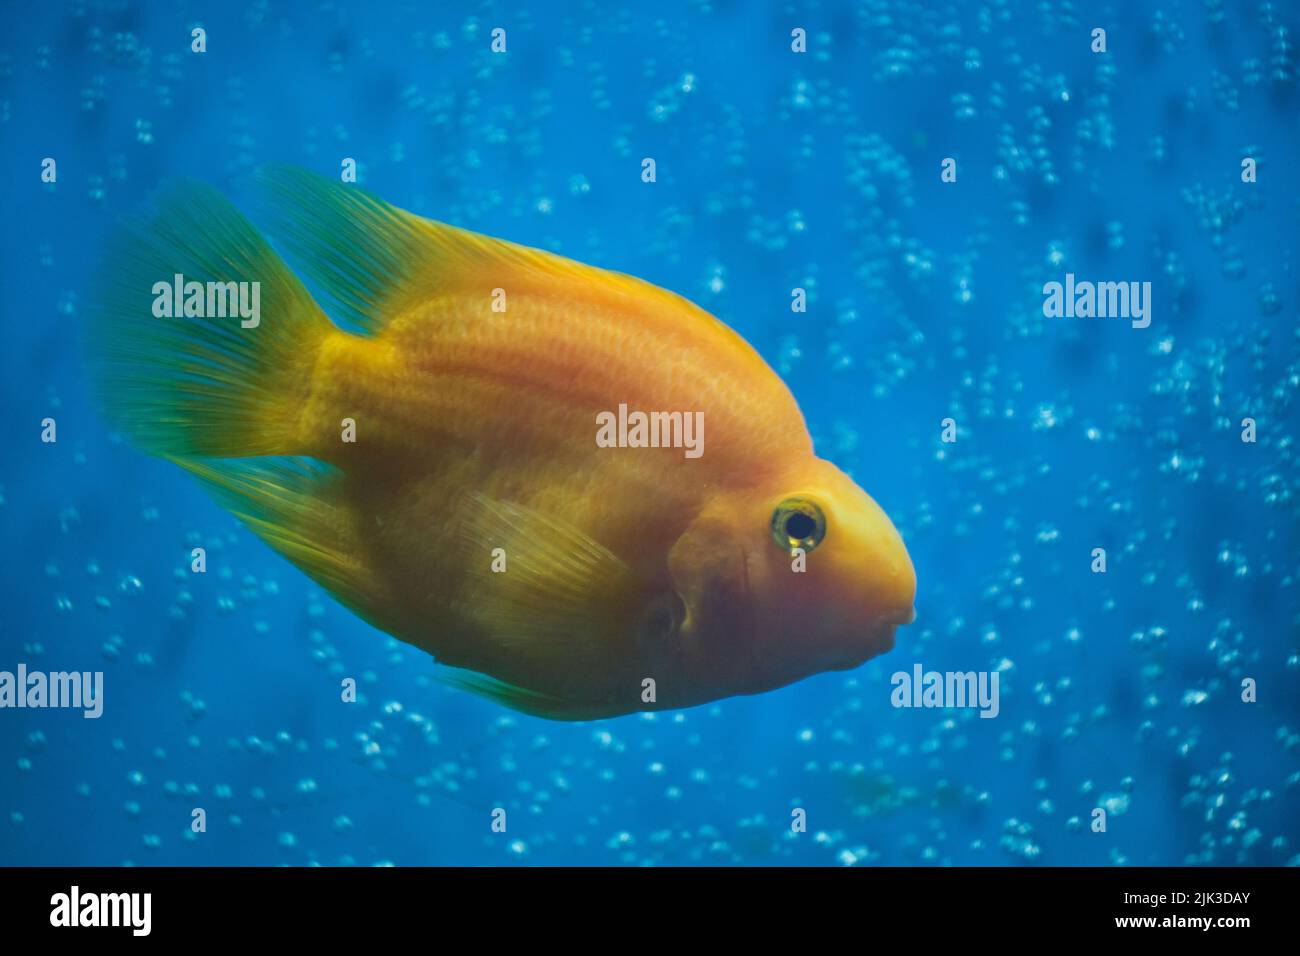 Red parrot fish blue background Stock Photo